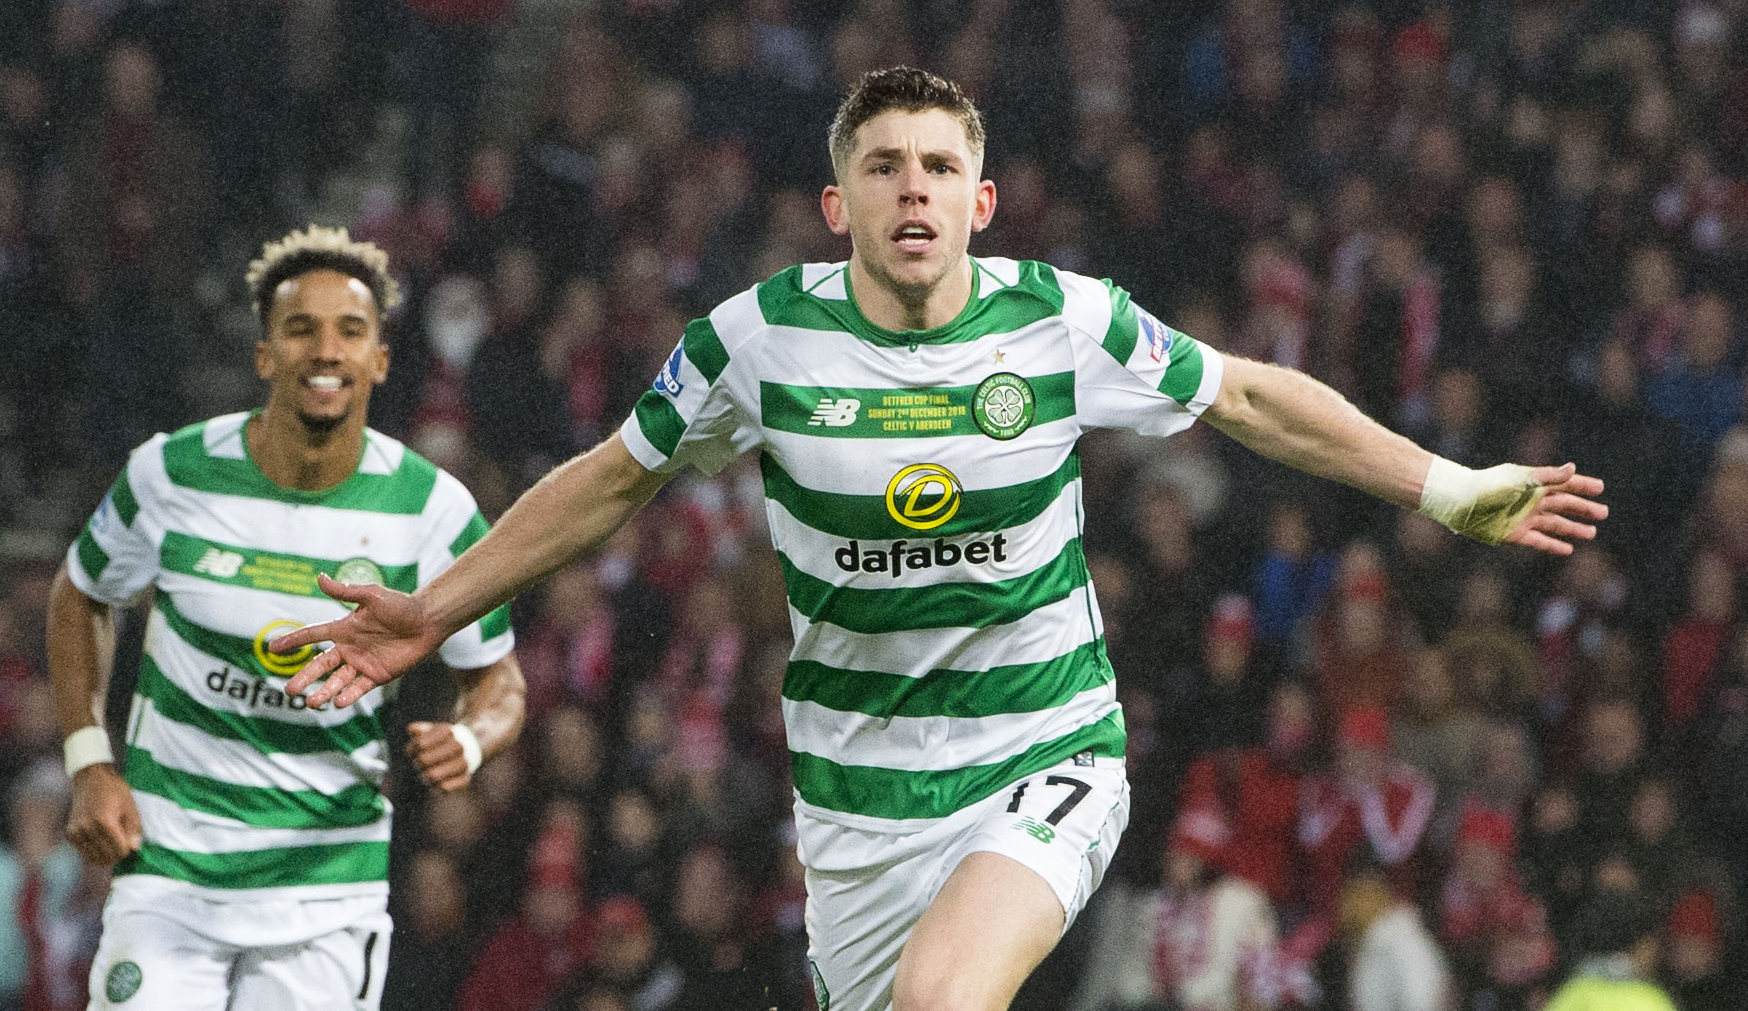 “We just want everyone to keep being safe” – Celtic midfielder Ryan Christie delivers message during coronavirus isolation